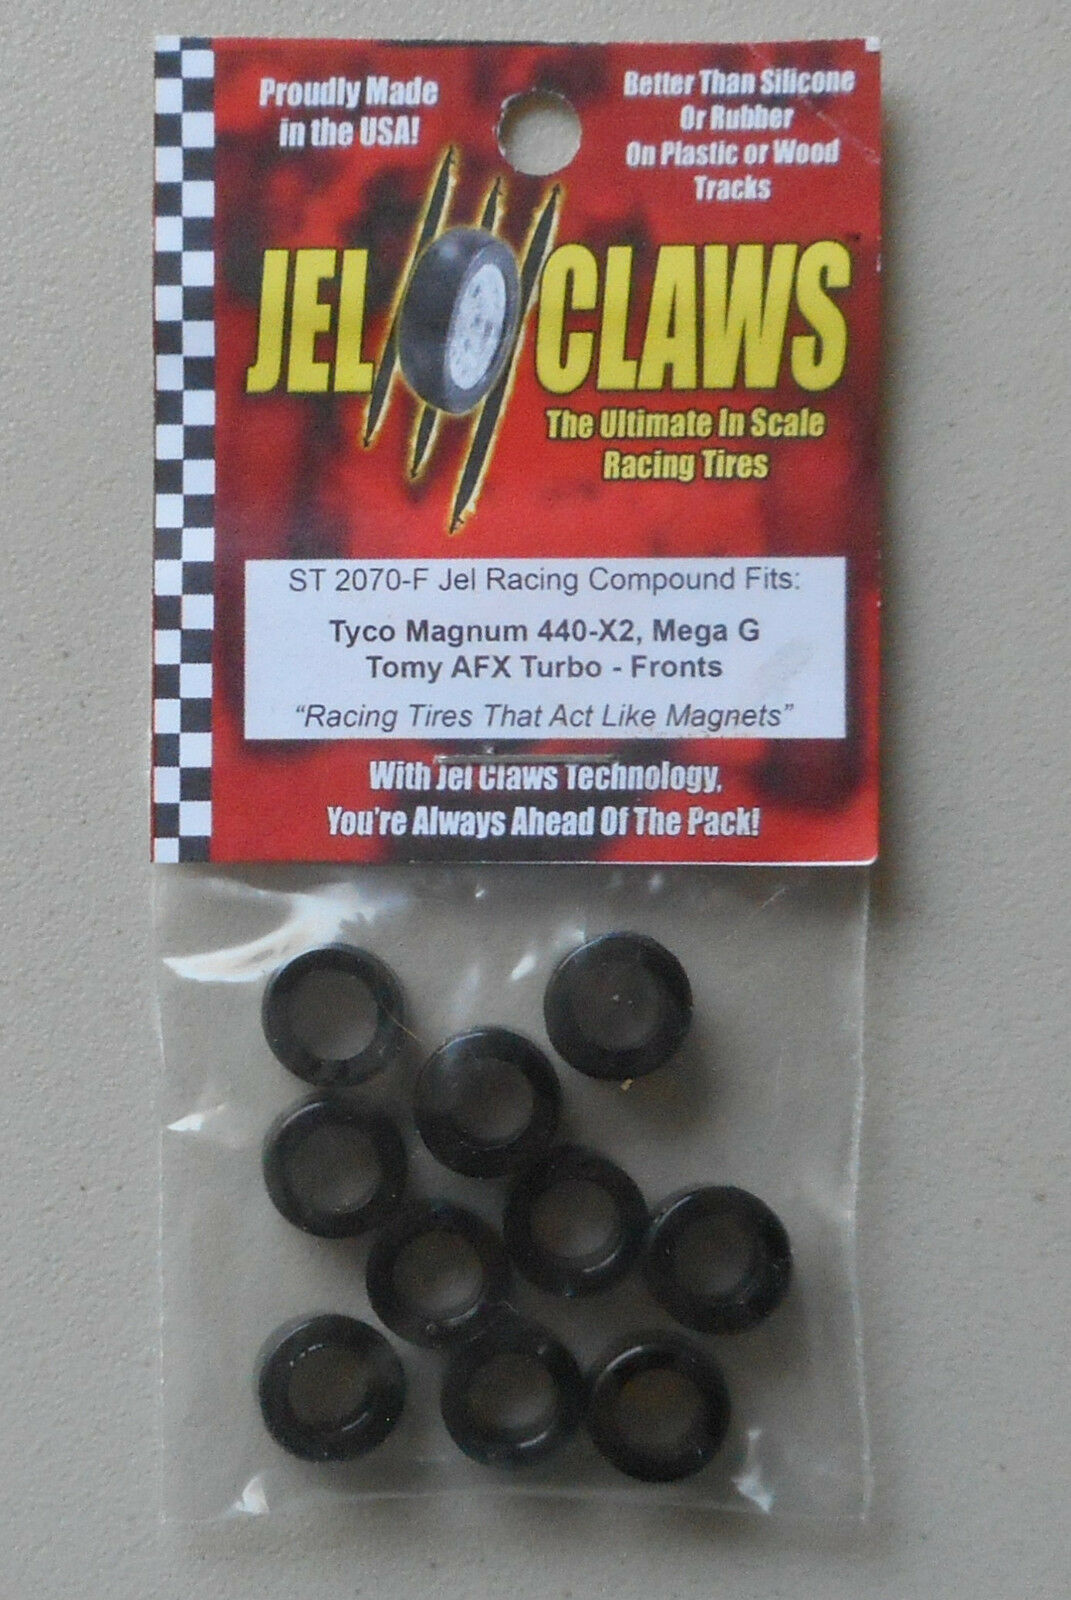 1/64 Rubber Racing Tires Tyc Magnum 440-x2 Fronts 10 Jel Claws Car Slot Rc 2070f